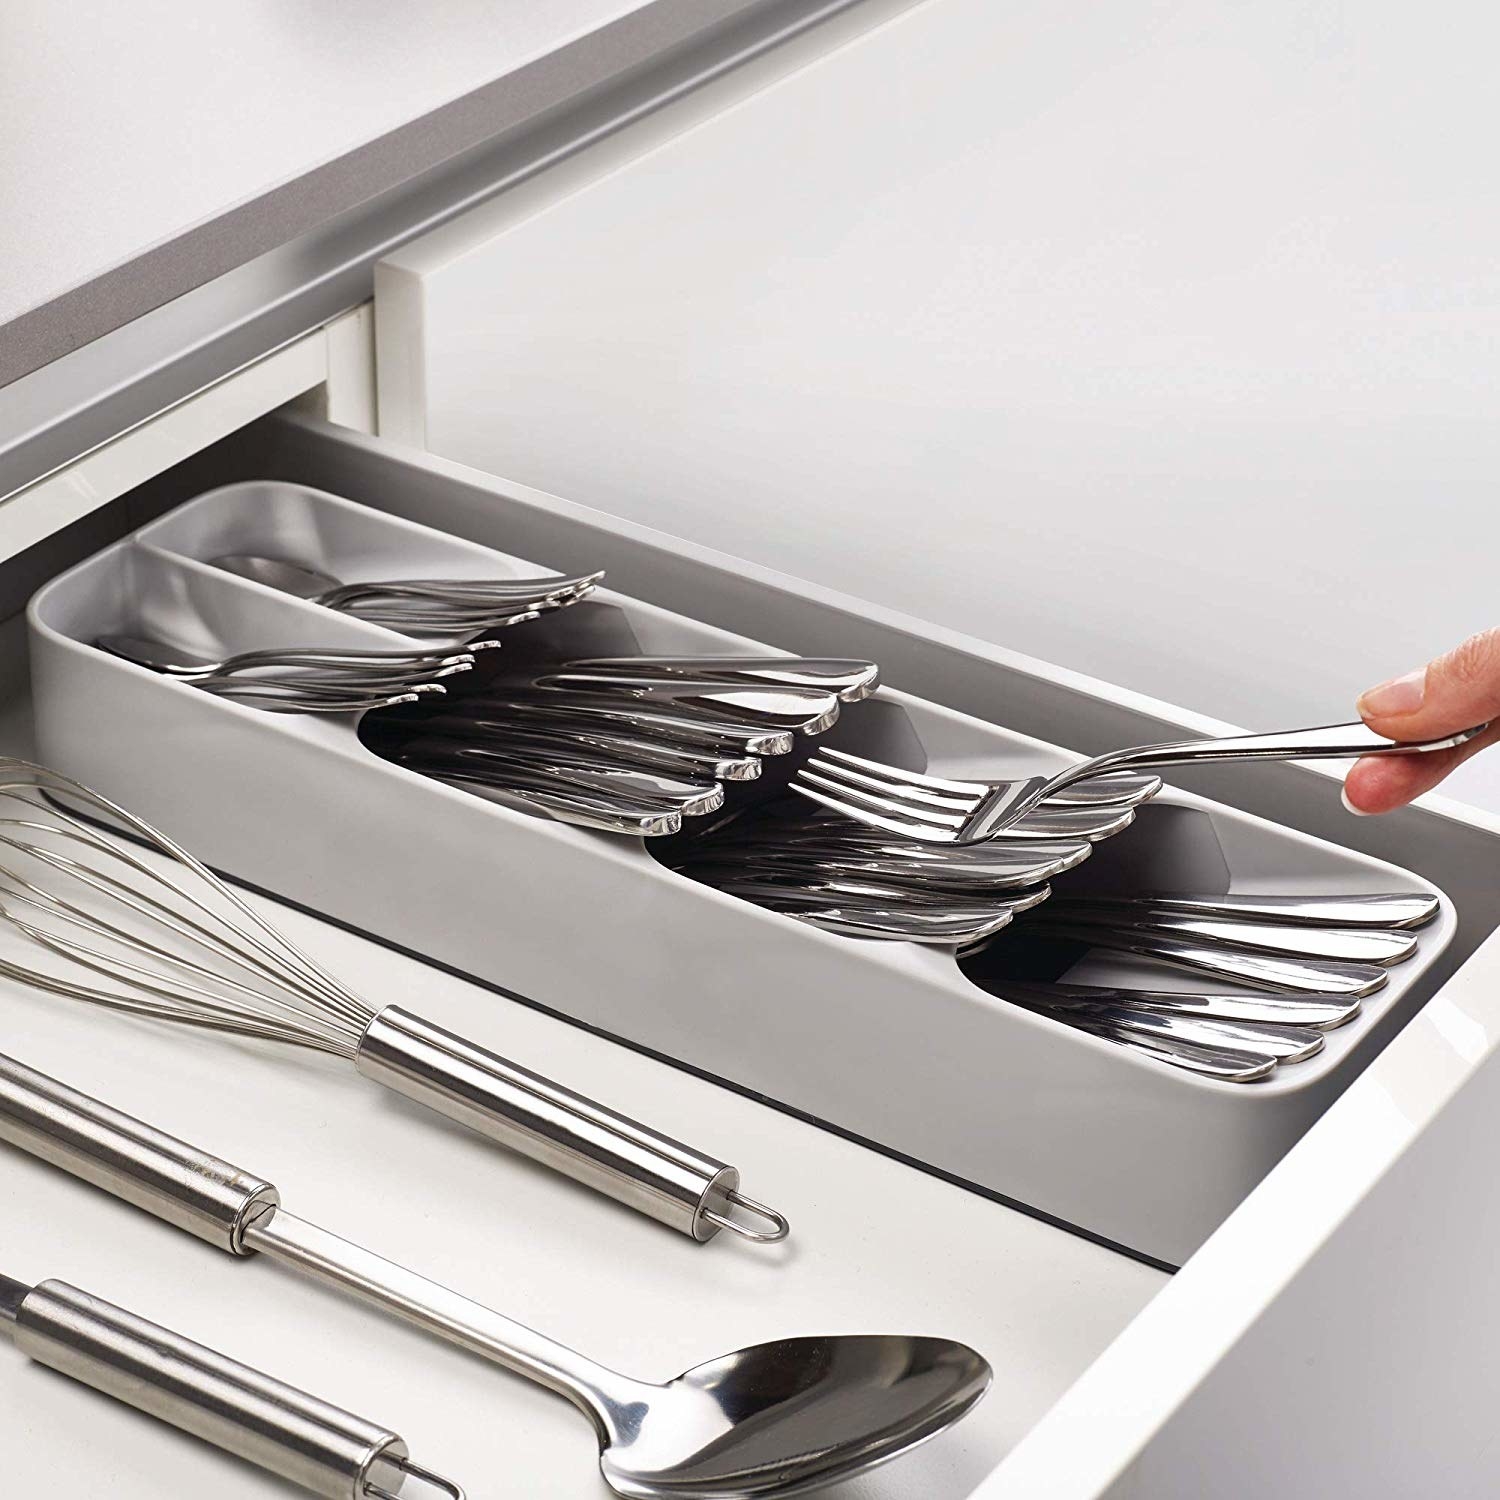 Make Your Kitchen Life Easier: 7 Gadgets That Are Simply Genius